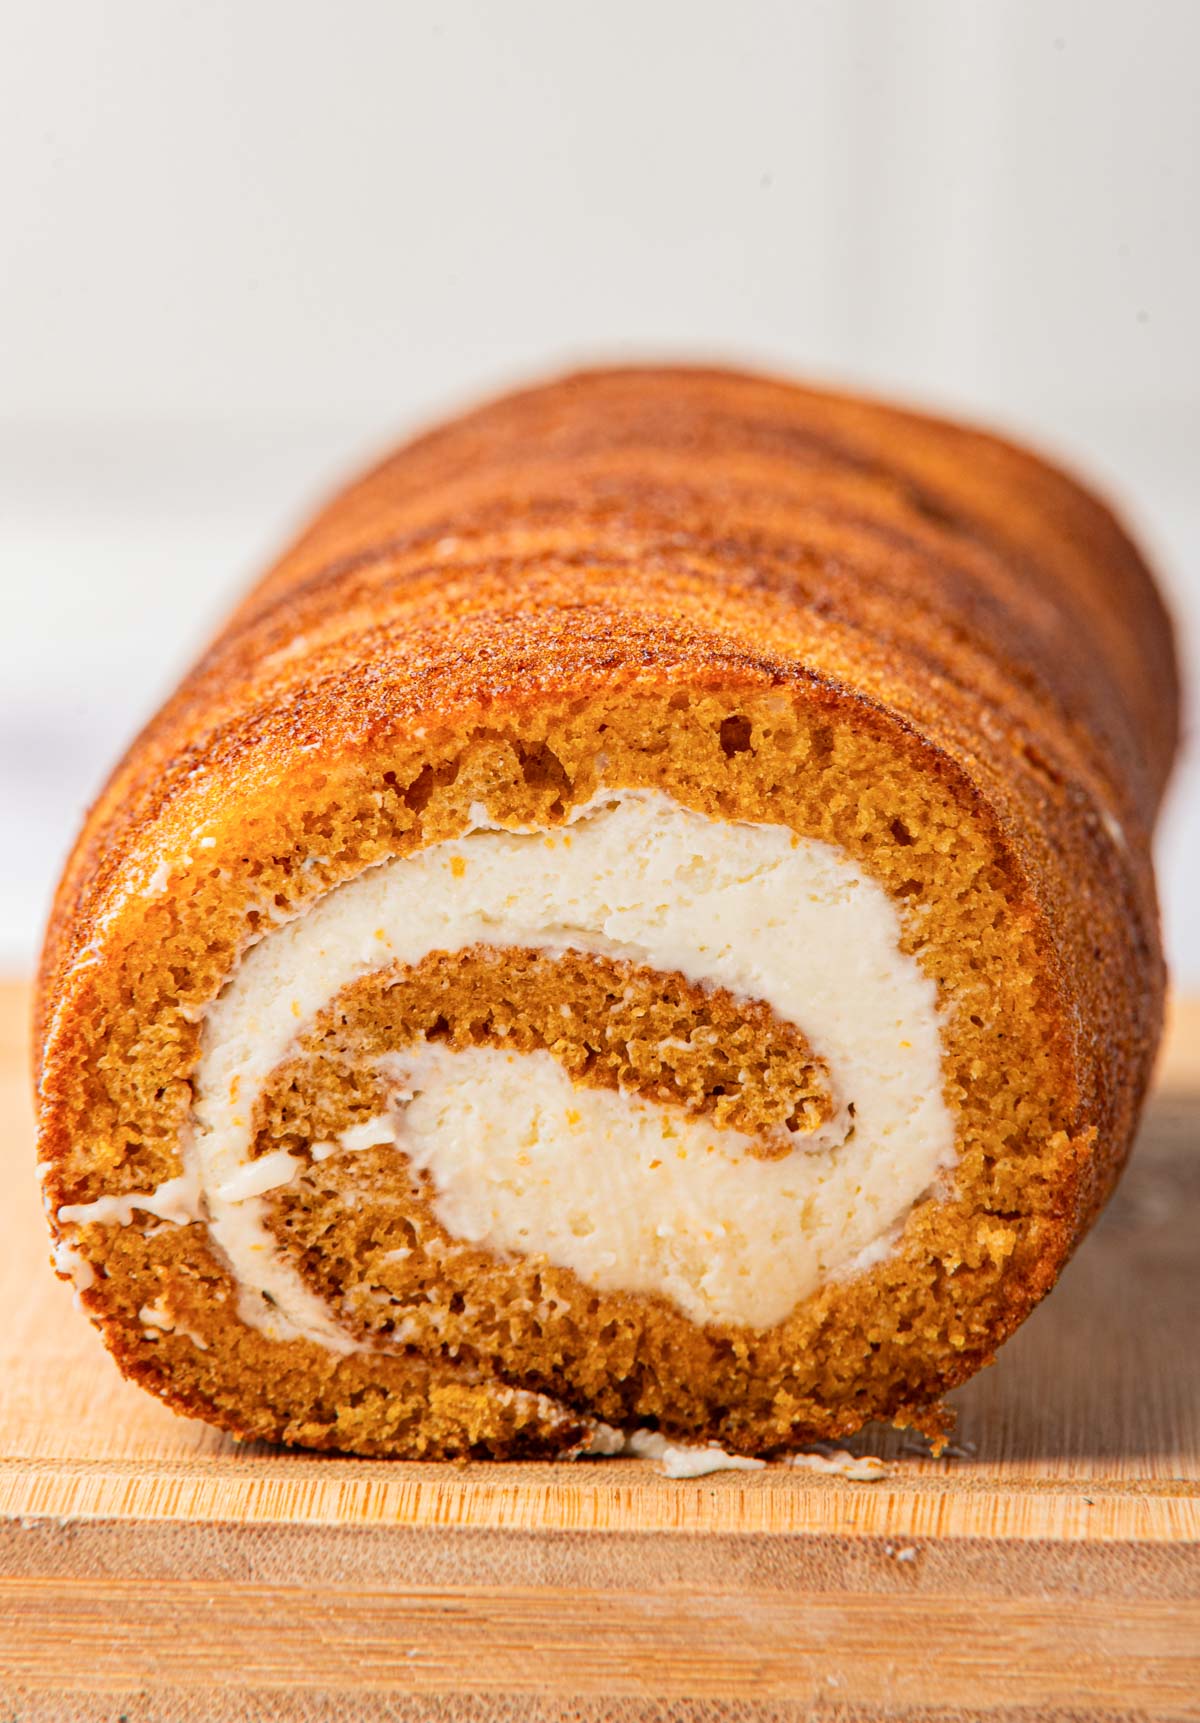 Front view of a pumpkin cake with cream cheese filling, showing the rolled layers on a wooden cutting board.